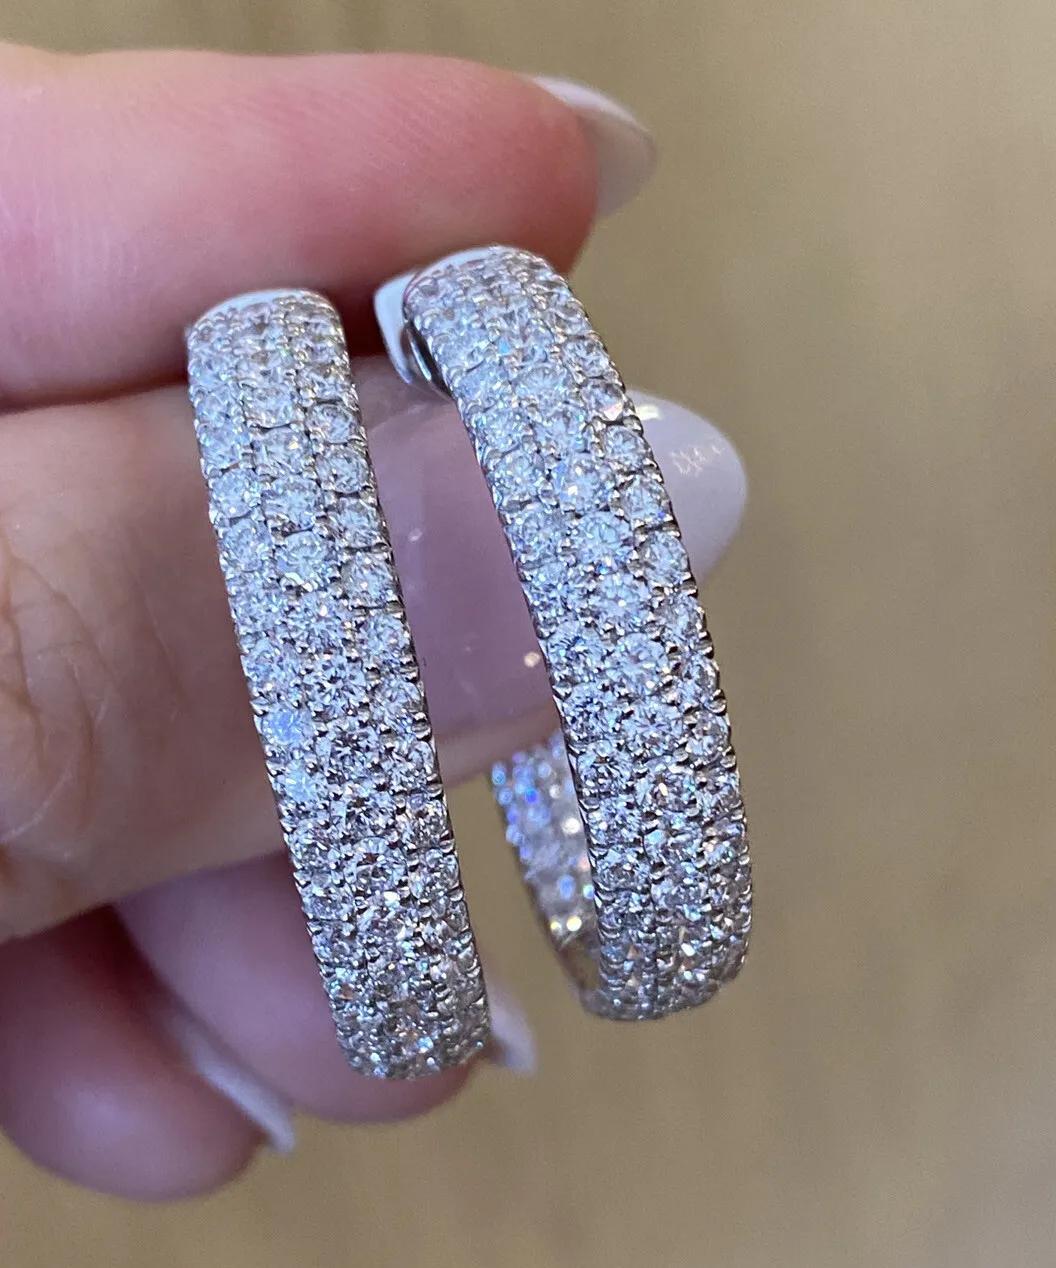 Odelia Large Round Pavé Diamond Hoop Earrings 5.25 Carats Total Weight in 18k White Gold

Diamond Hoop Earrings features 3 Rows of Round Brilliant Diamonds on the inside and outside of the earrings Pavé set in 18k White Gold by Odelia.

Total